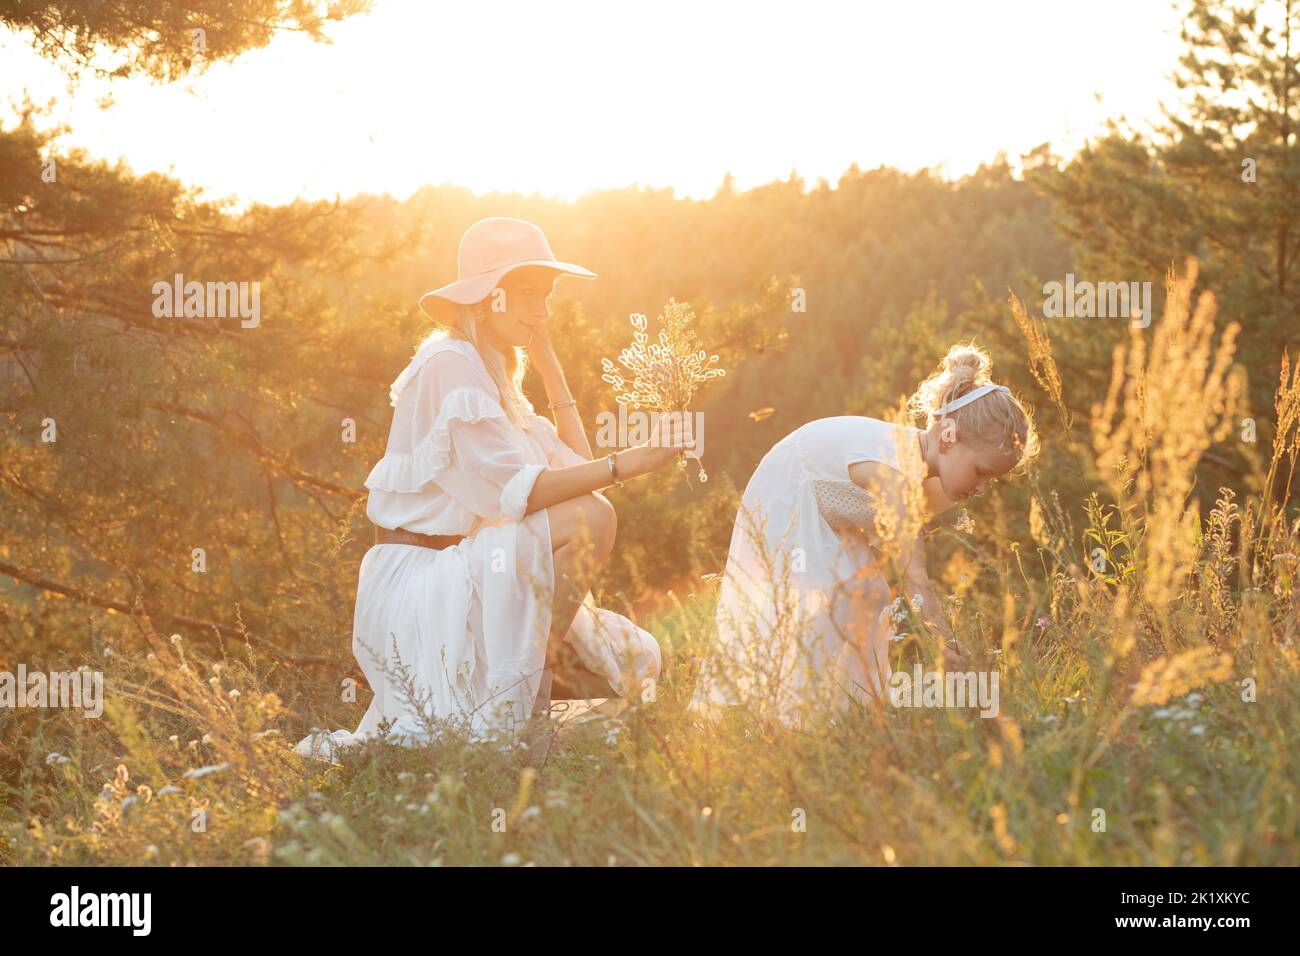 Smiling, cheerful, joyful, calm woman, mother in hat and small girl in white dress have fun and pick up herbs in nature Stock Photo